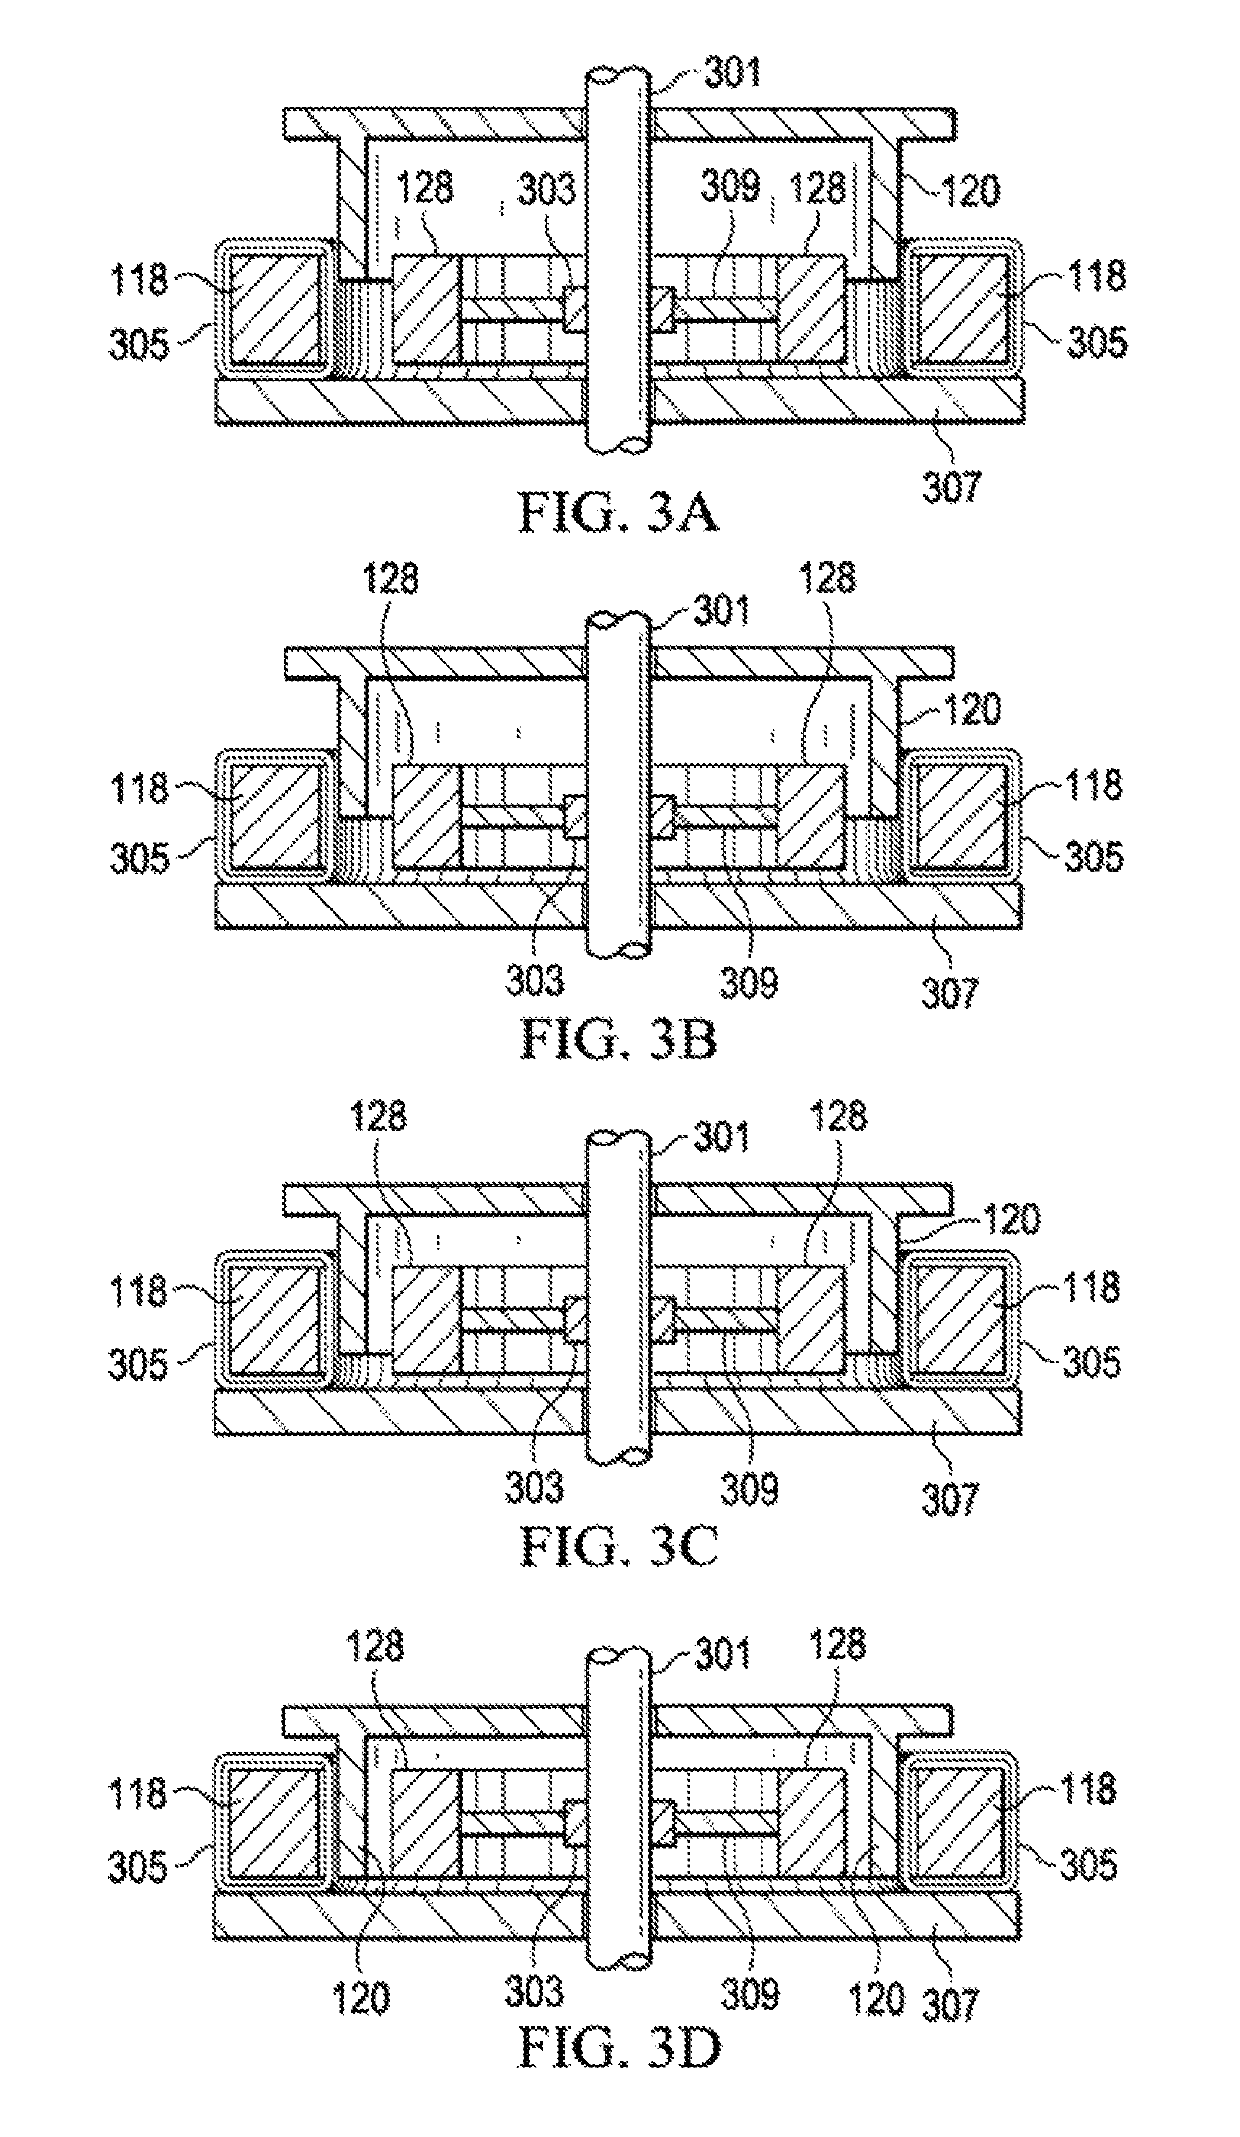 Flywheel energy storage device with induction torque transfer